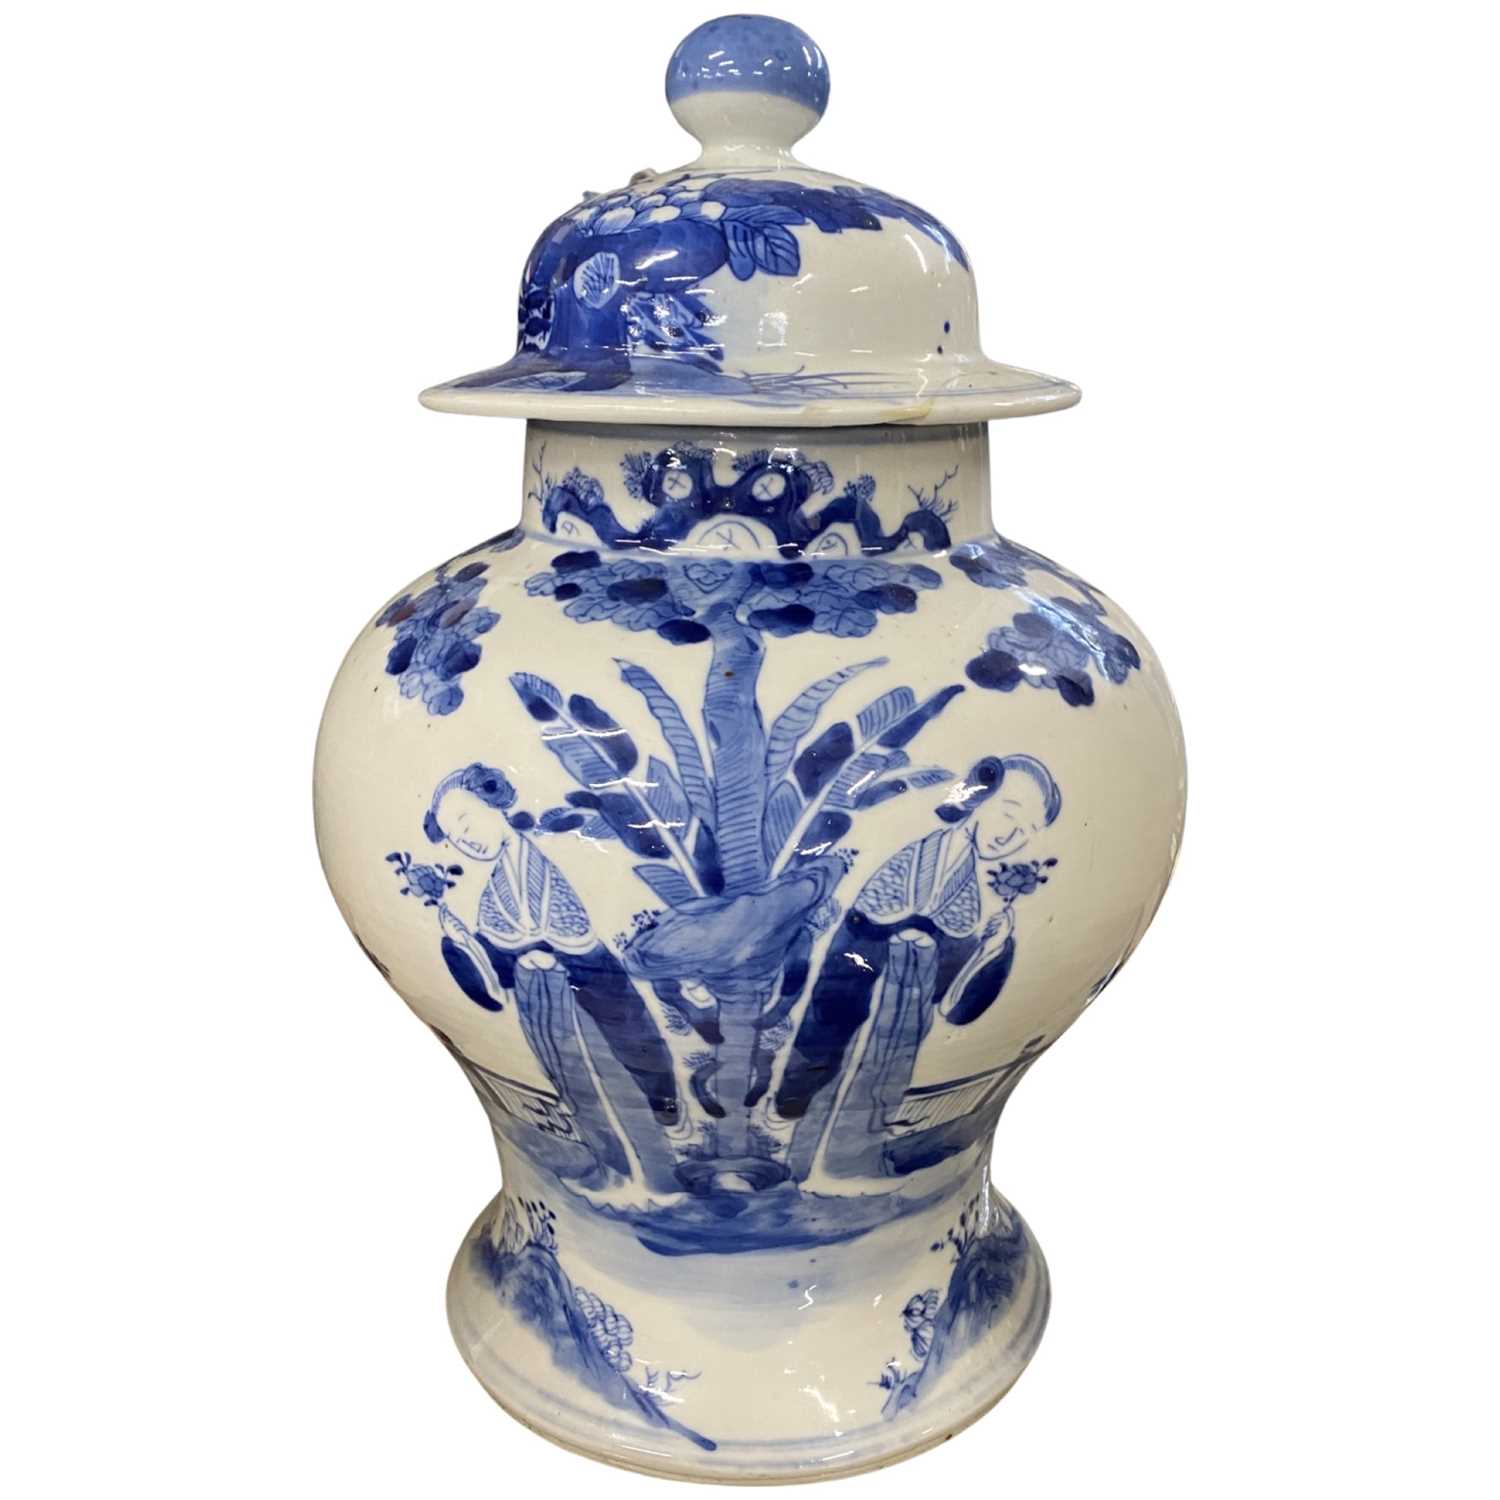 Chinese vase and cover with blue and white designs in Kangxi style, 4 character mark to base, 32cm